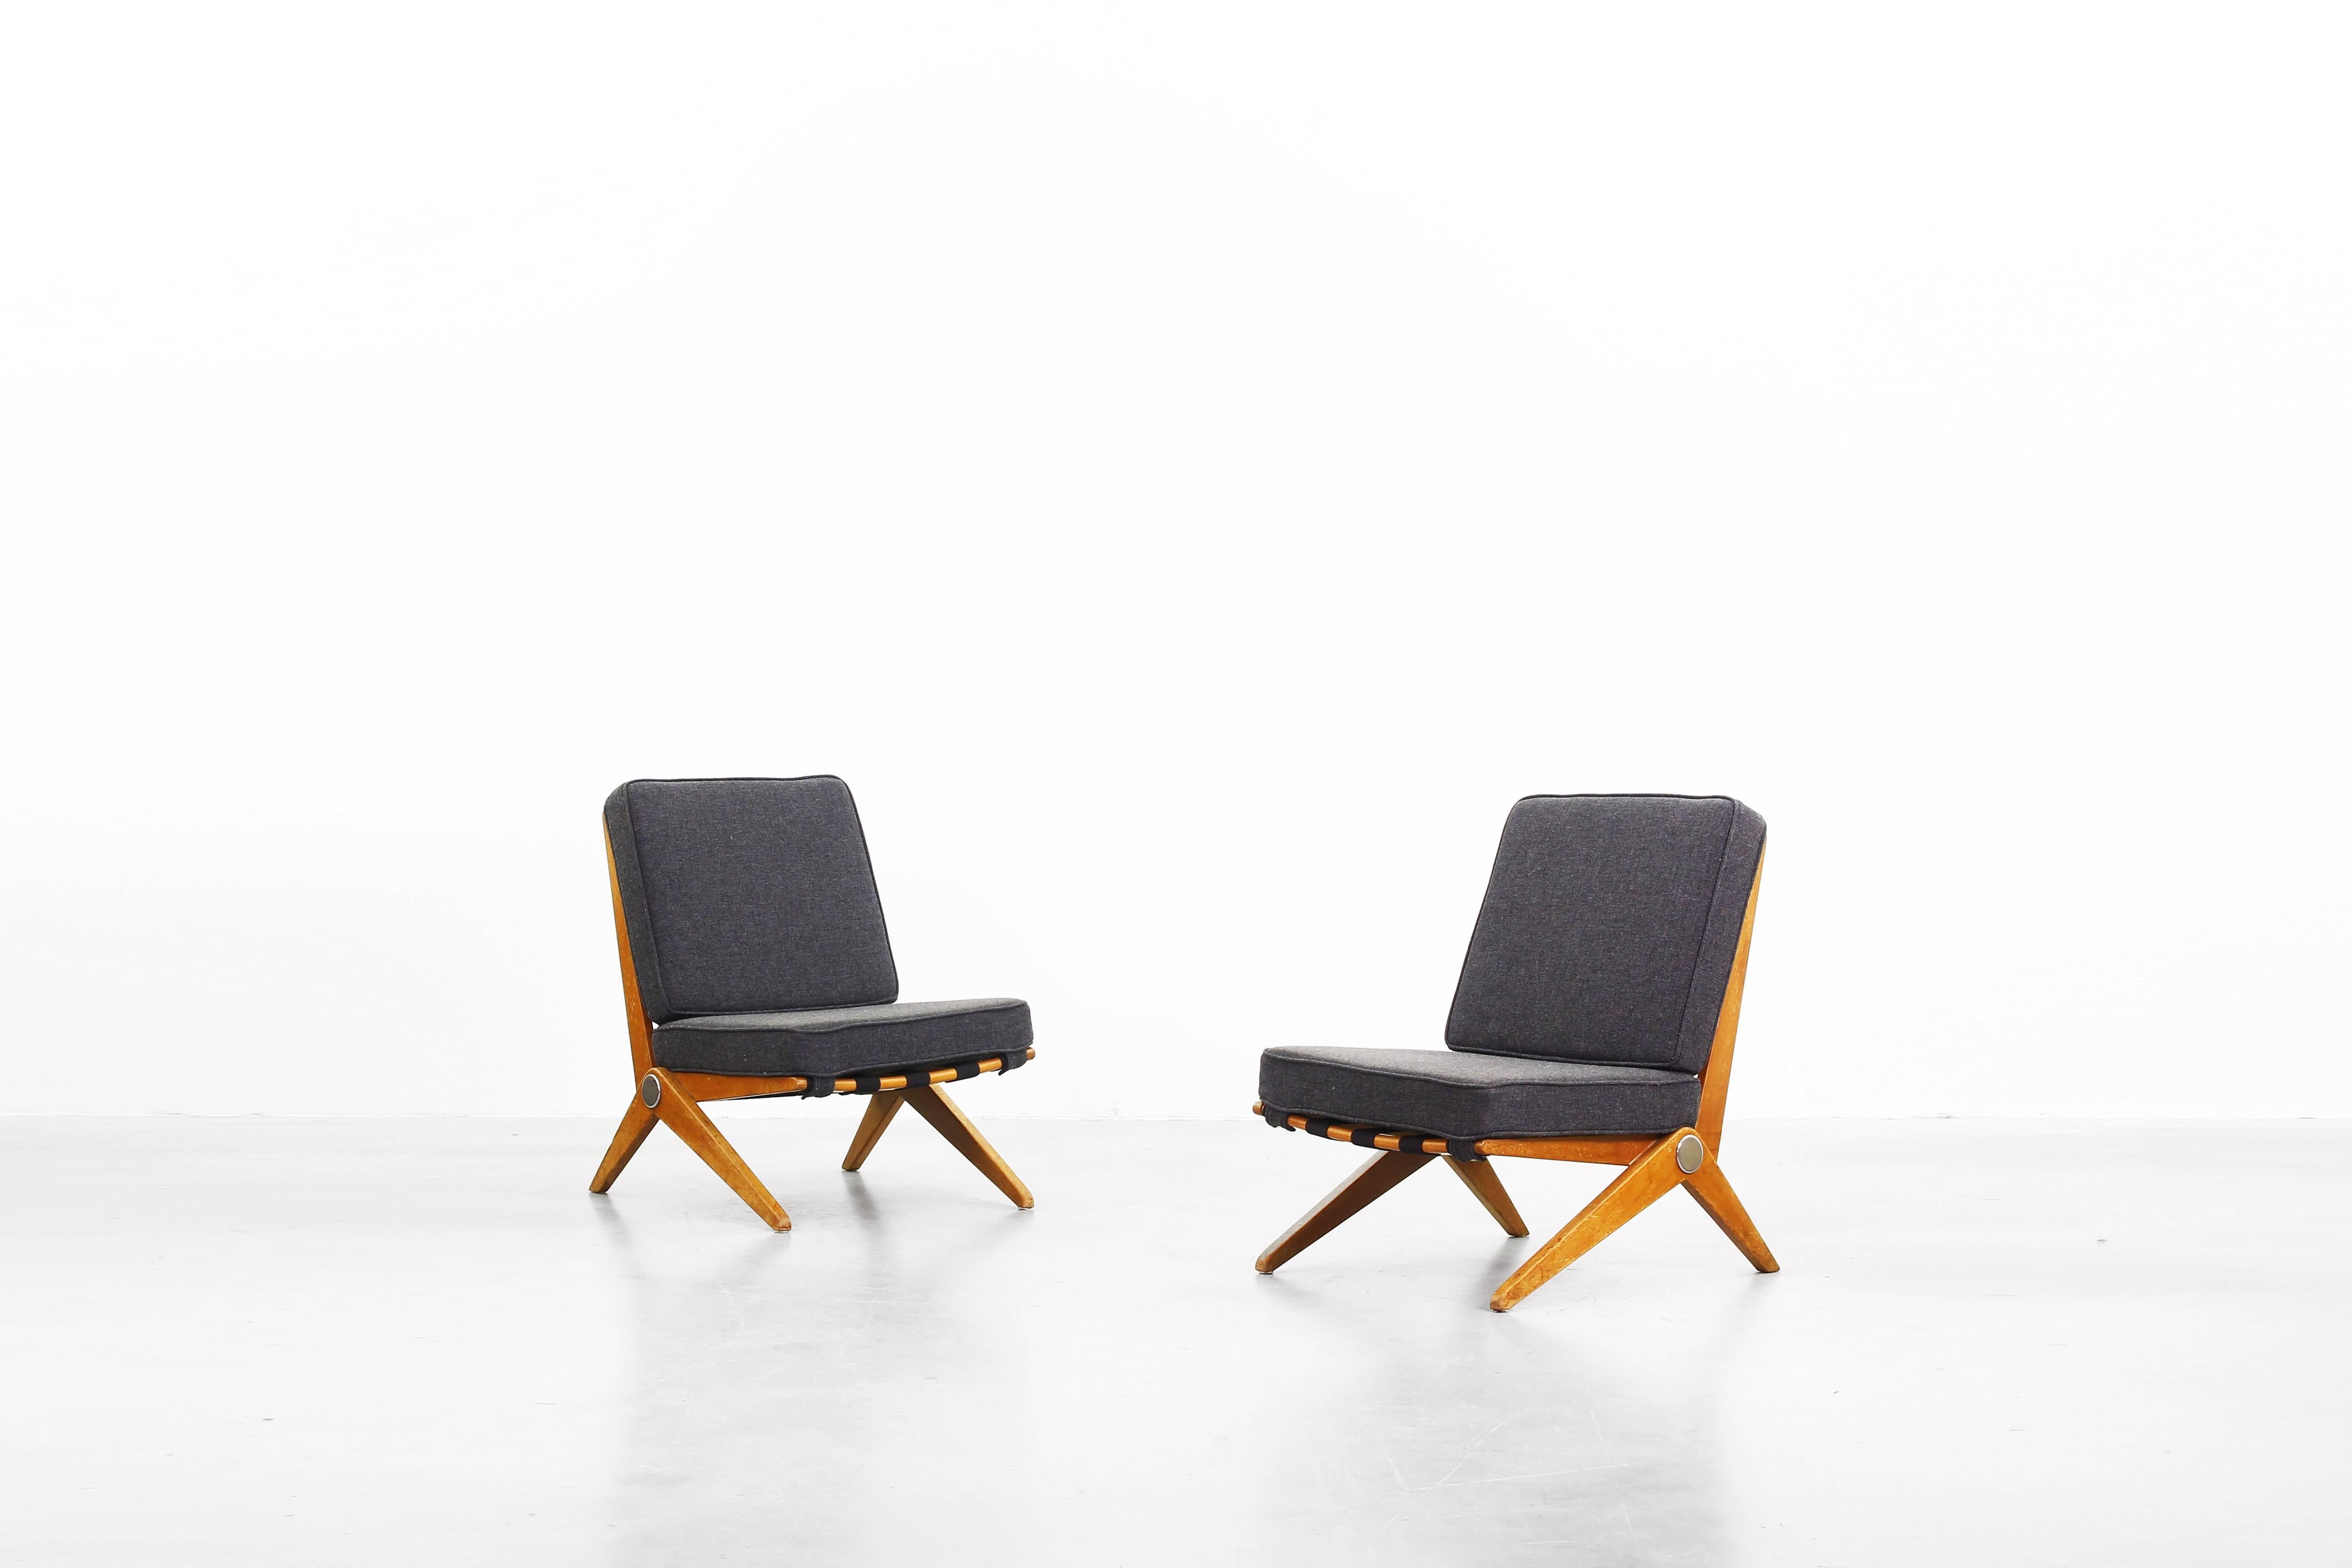 Beautiful pair of Scissor chairs designed by Pierre Jeanneret for Knoll International, manufactured in the 1960s, USA.
The chairs are in a good used condition with a beautiful patina on the wooden frame. The cushions were newly reupholstered.